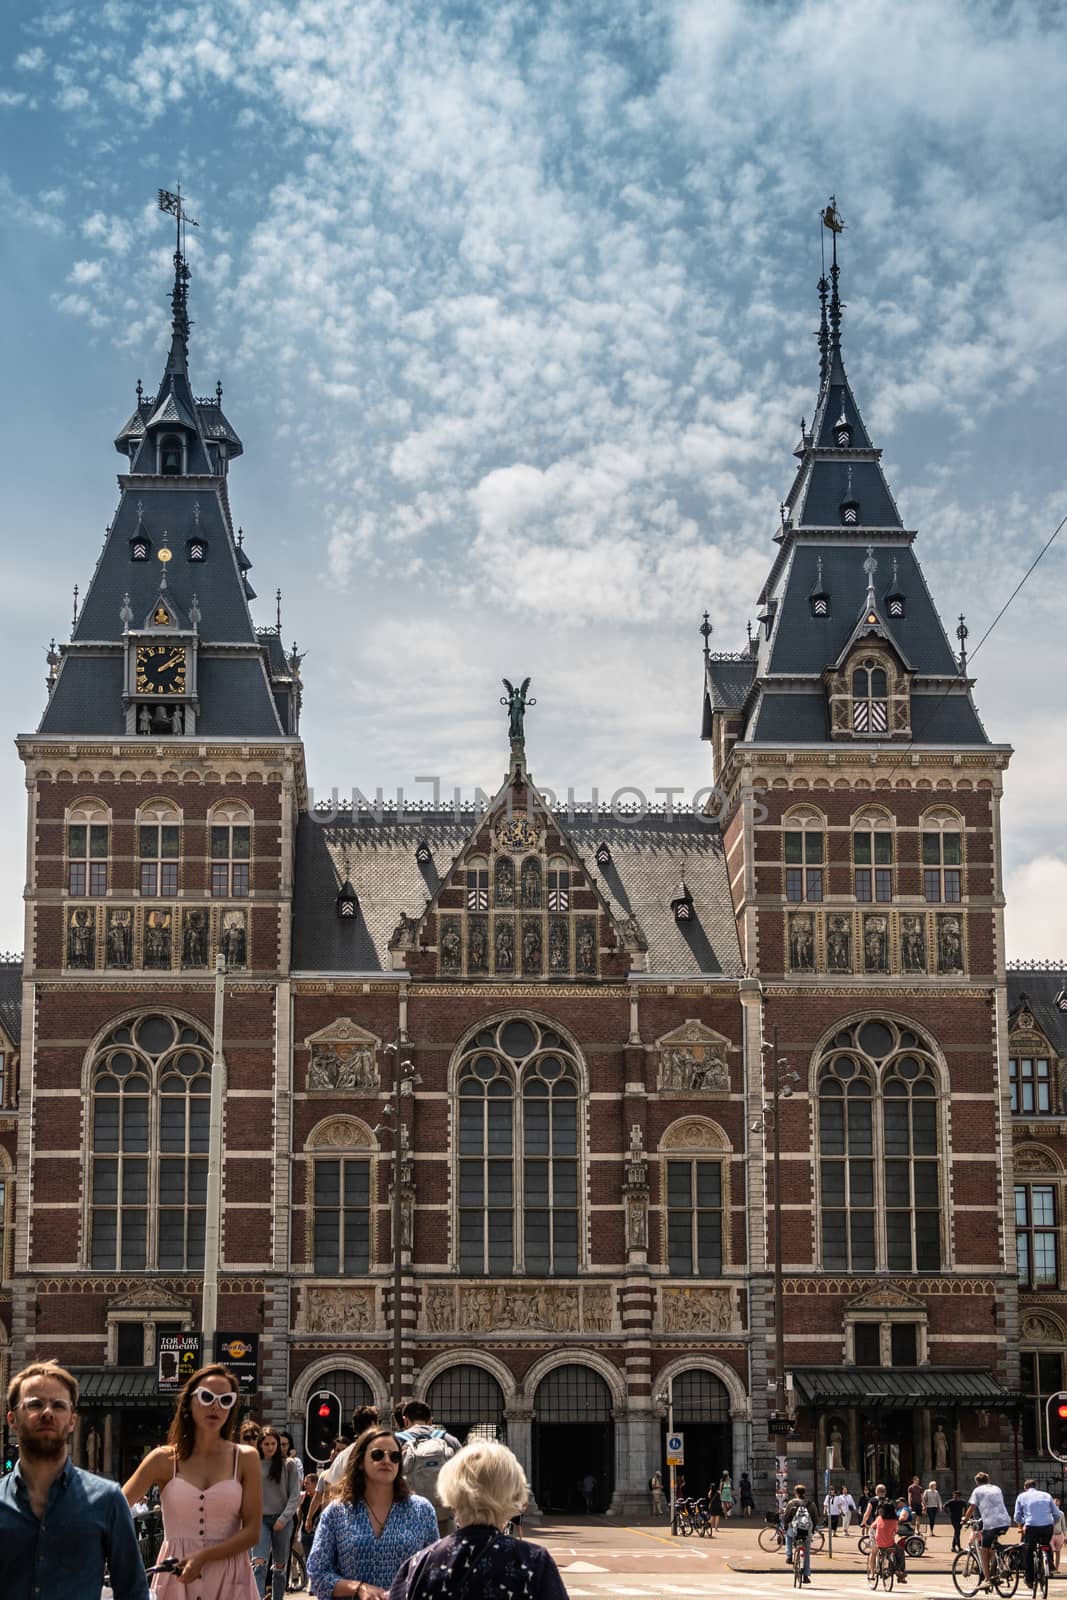 Rijksmuseum towers and central entrance in Amsterdam Netherlands by Claudine